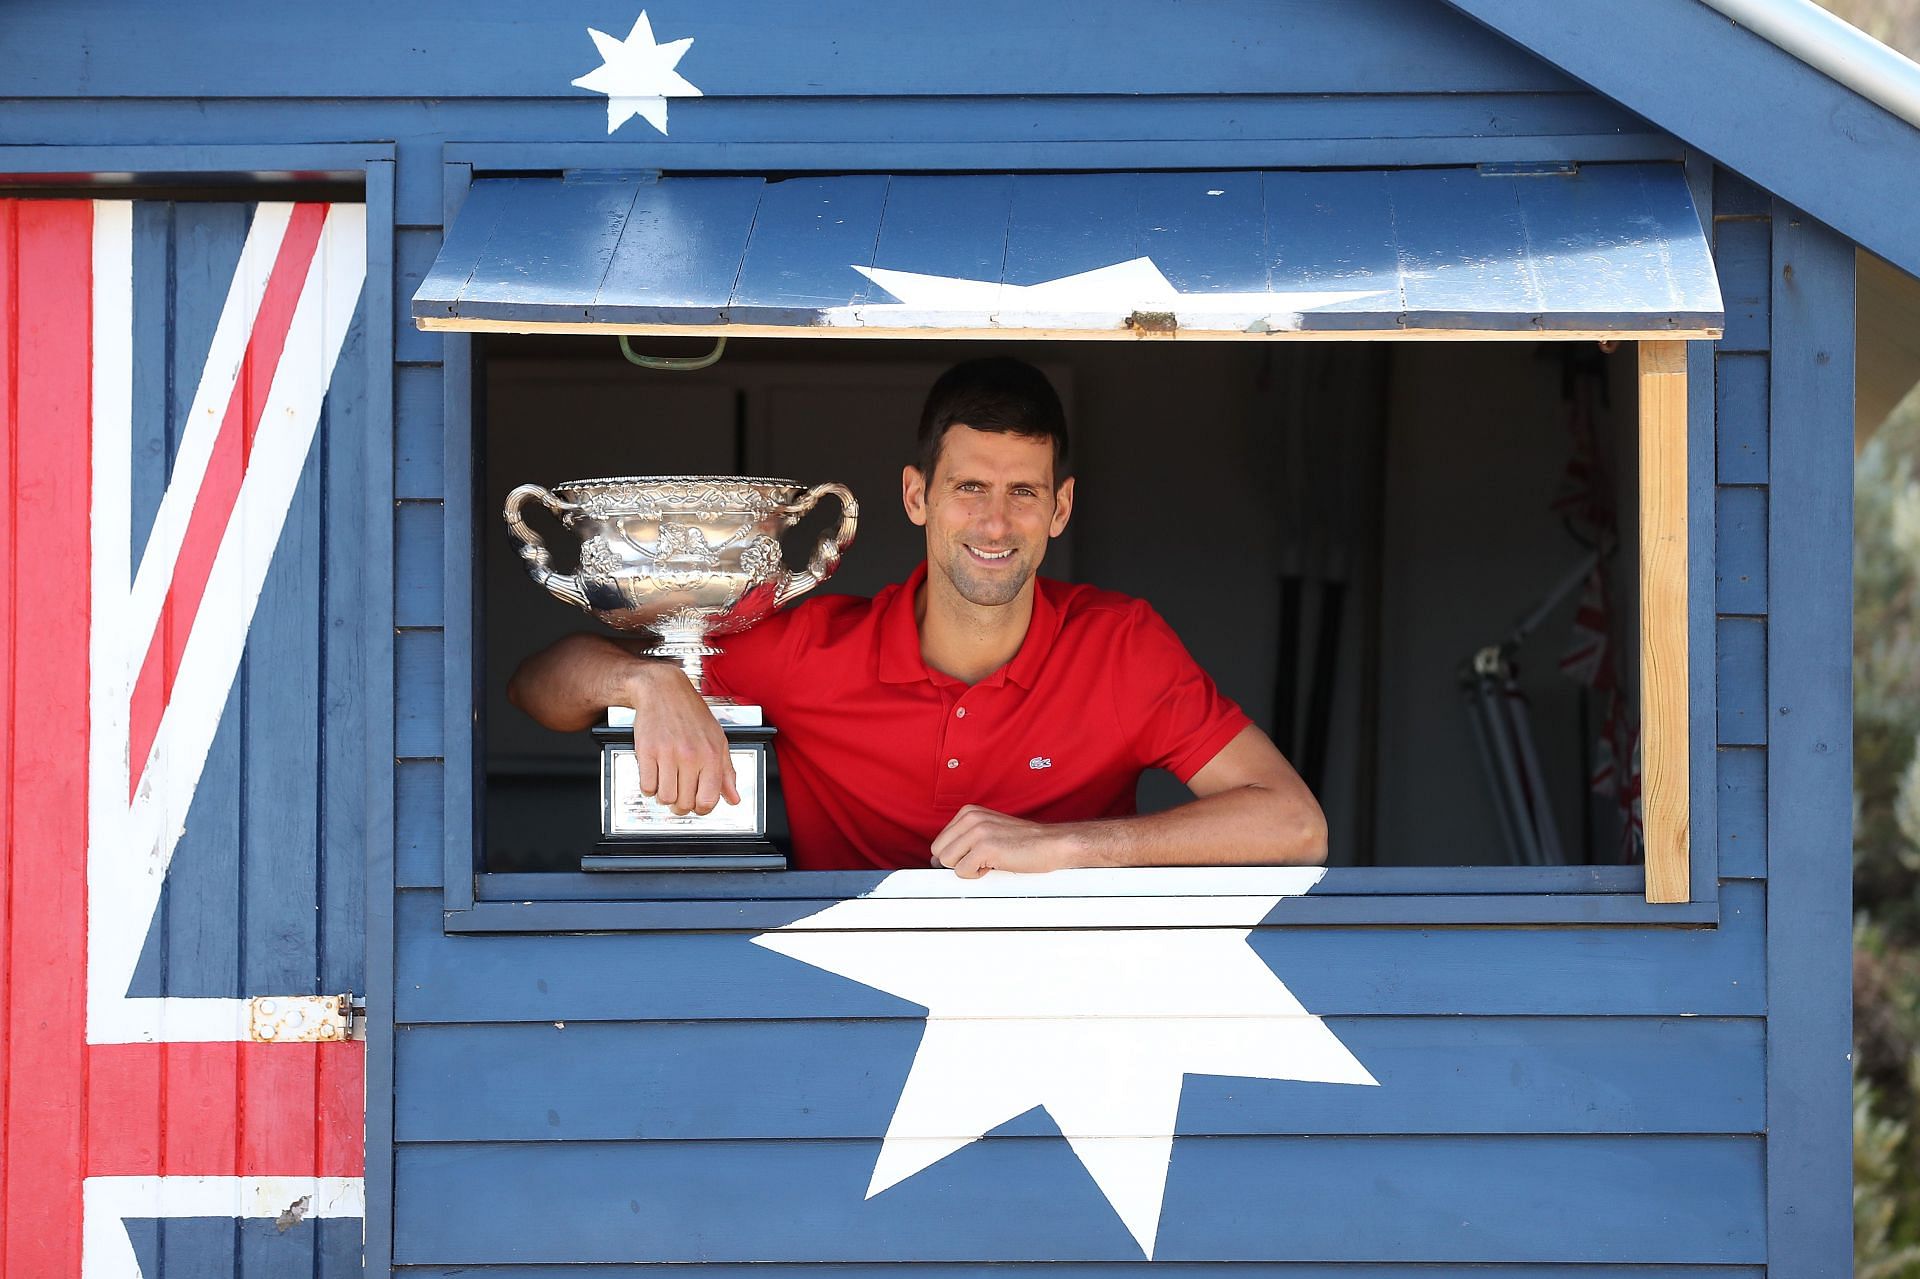 Djokovic will be the defending champion at the 2022 Australian Open